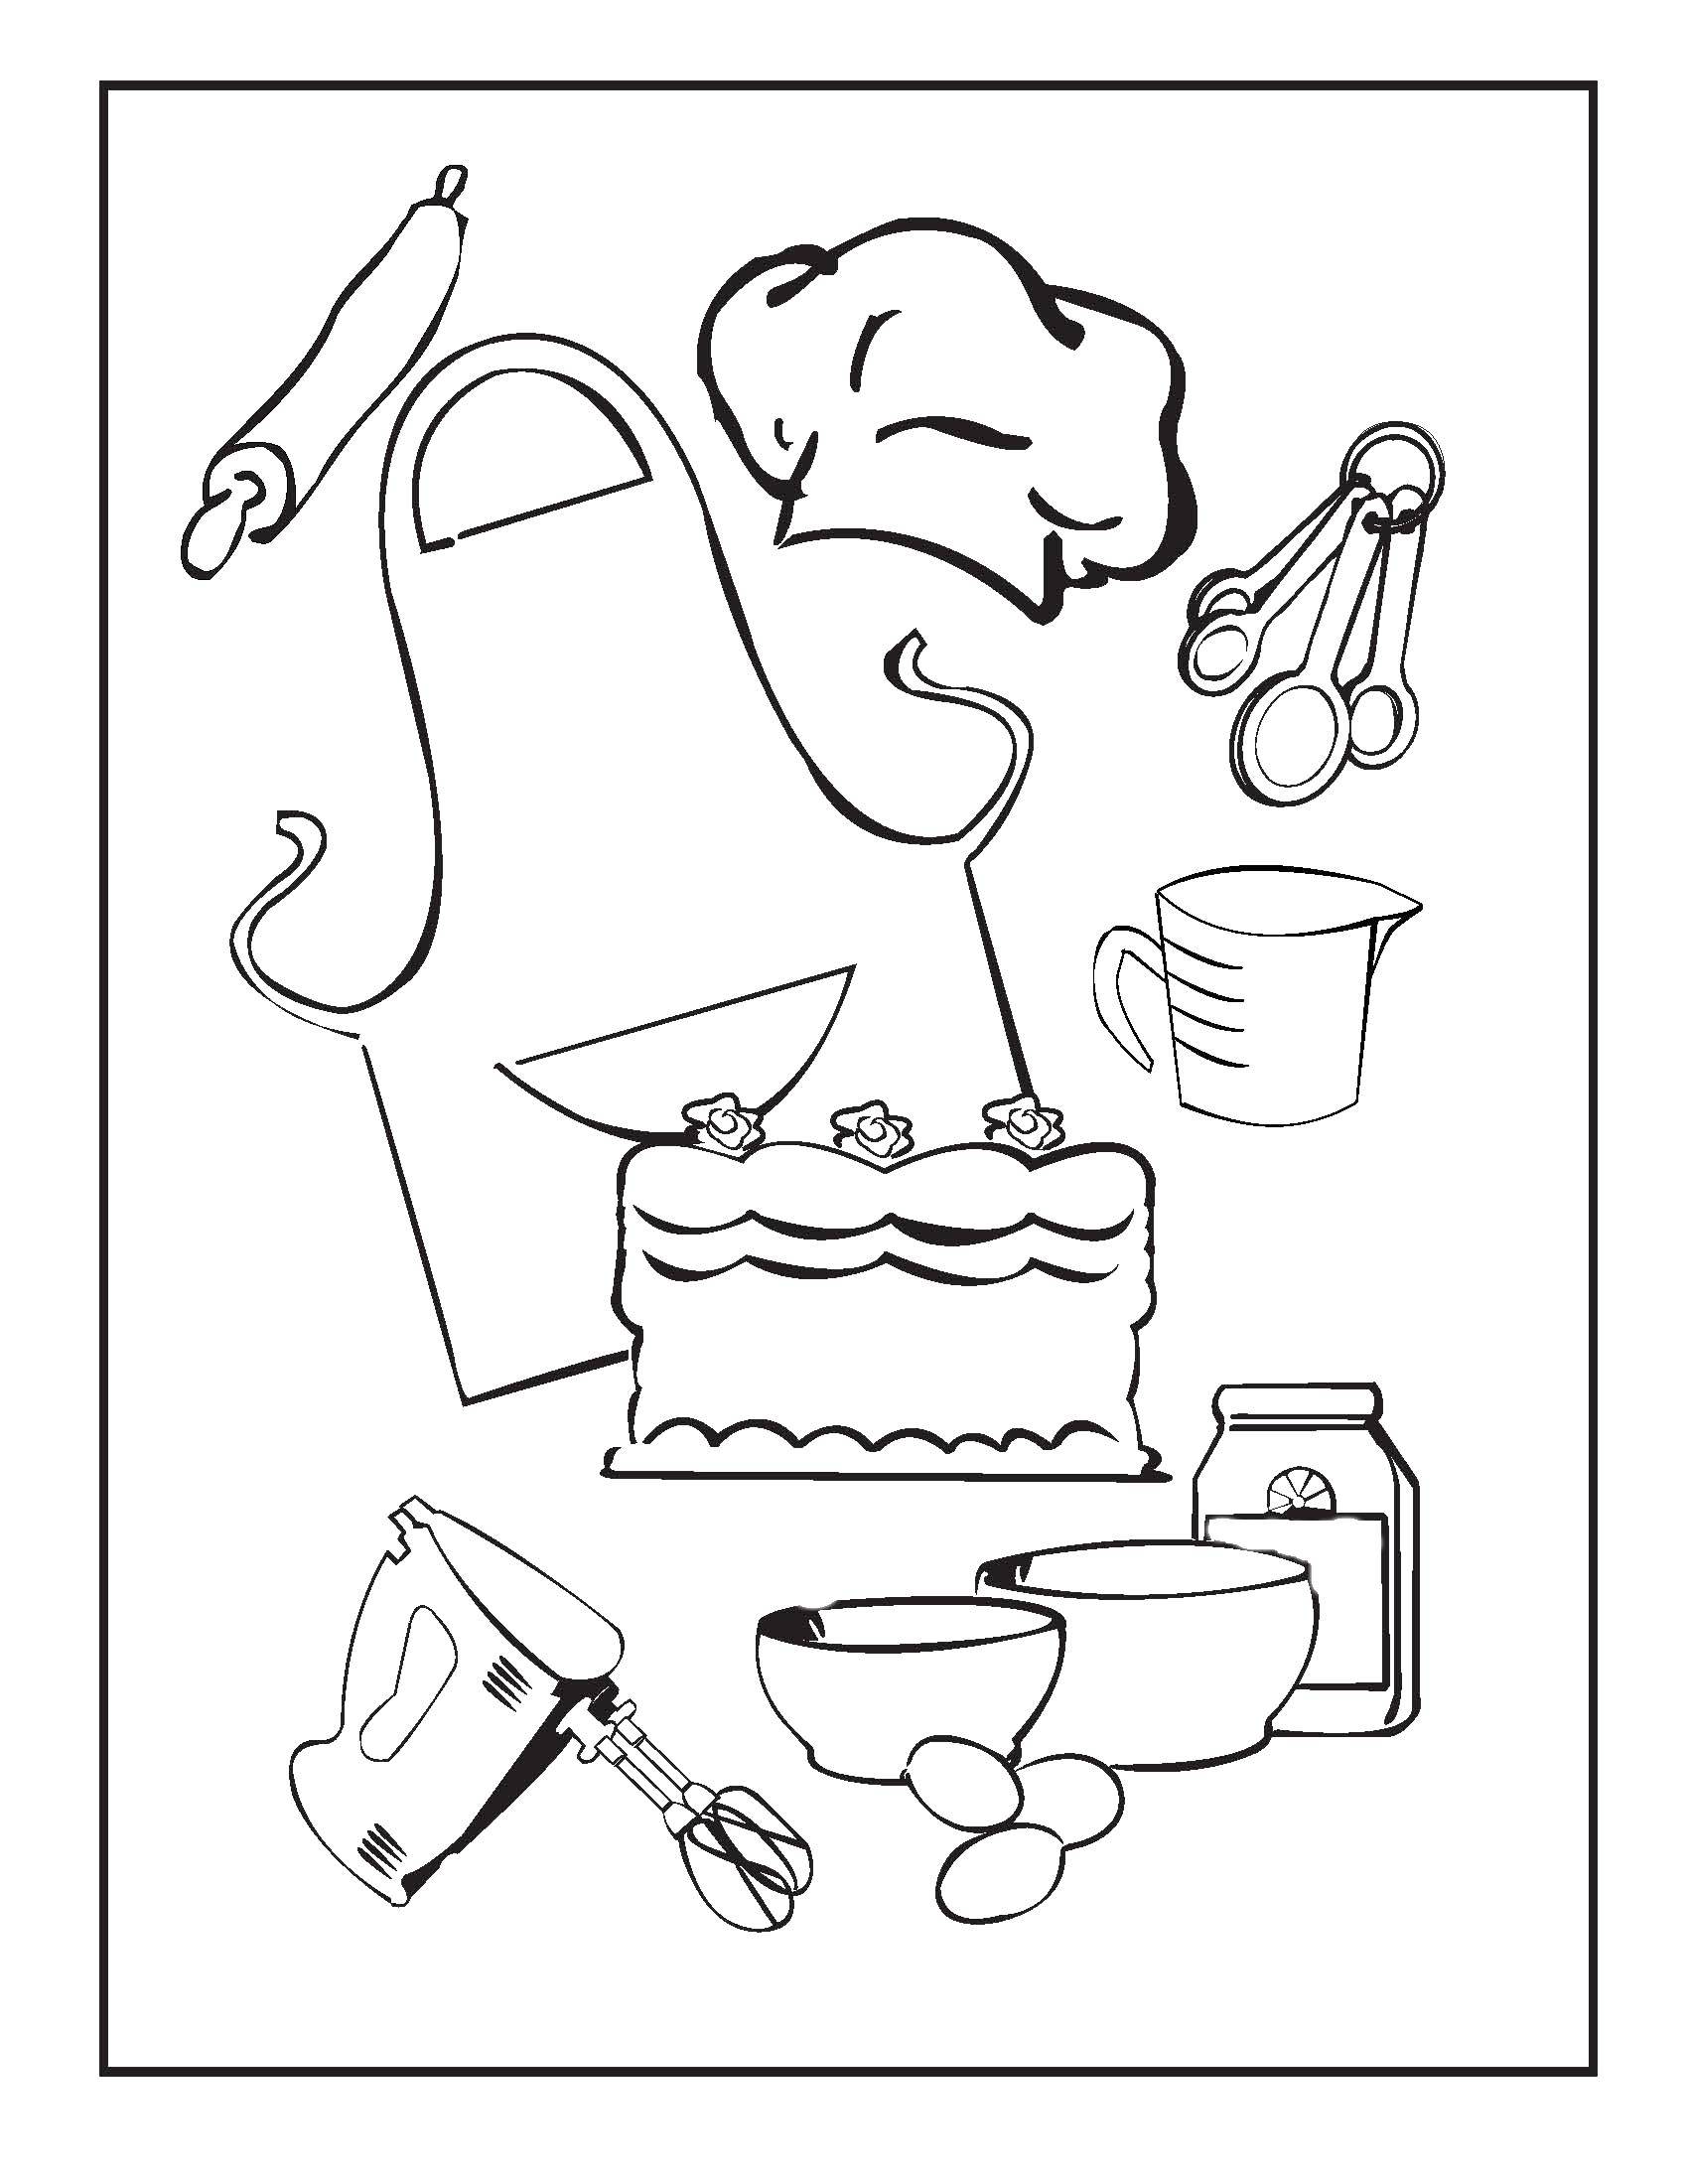 Coloring Cooking utensils. Category Cooking. Tags:  mixer, apron, cake, cap.